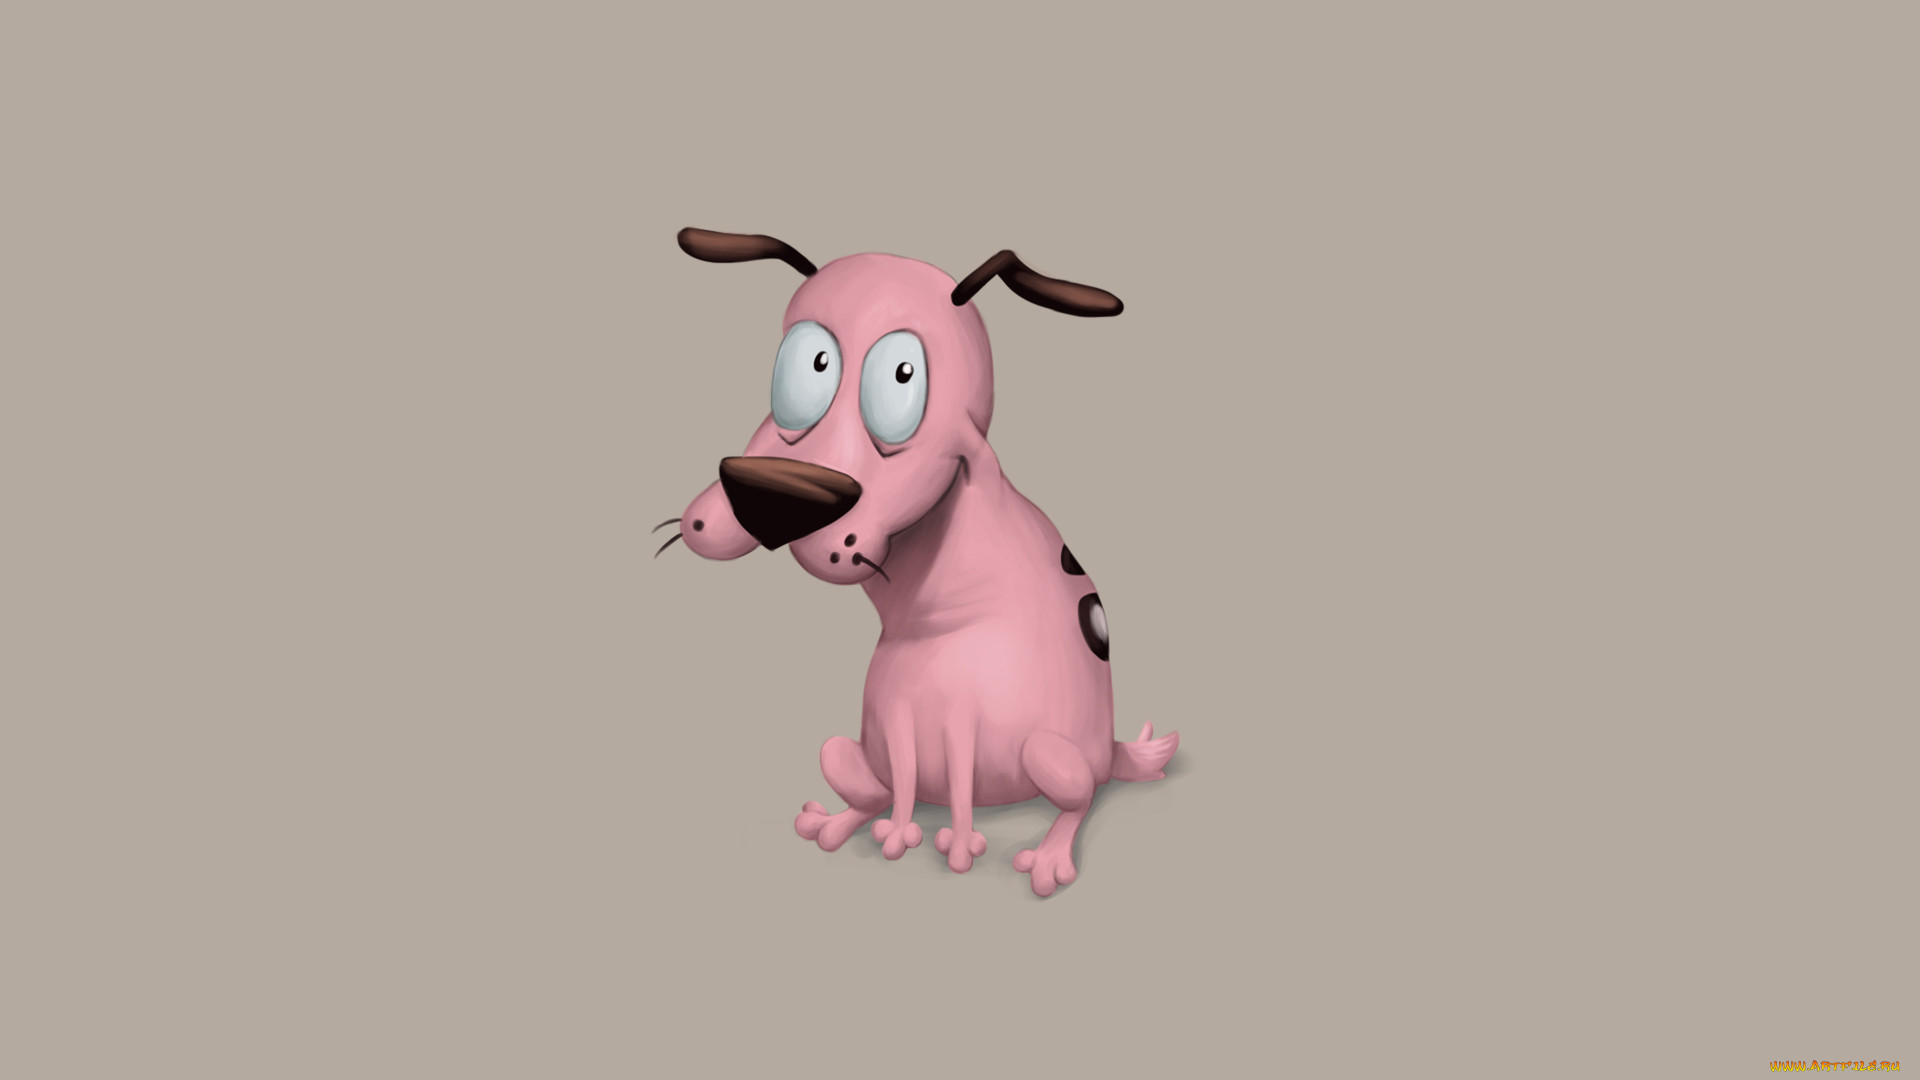    , , courage the cowardly dog, , , , courage, the, cowardly, dog